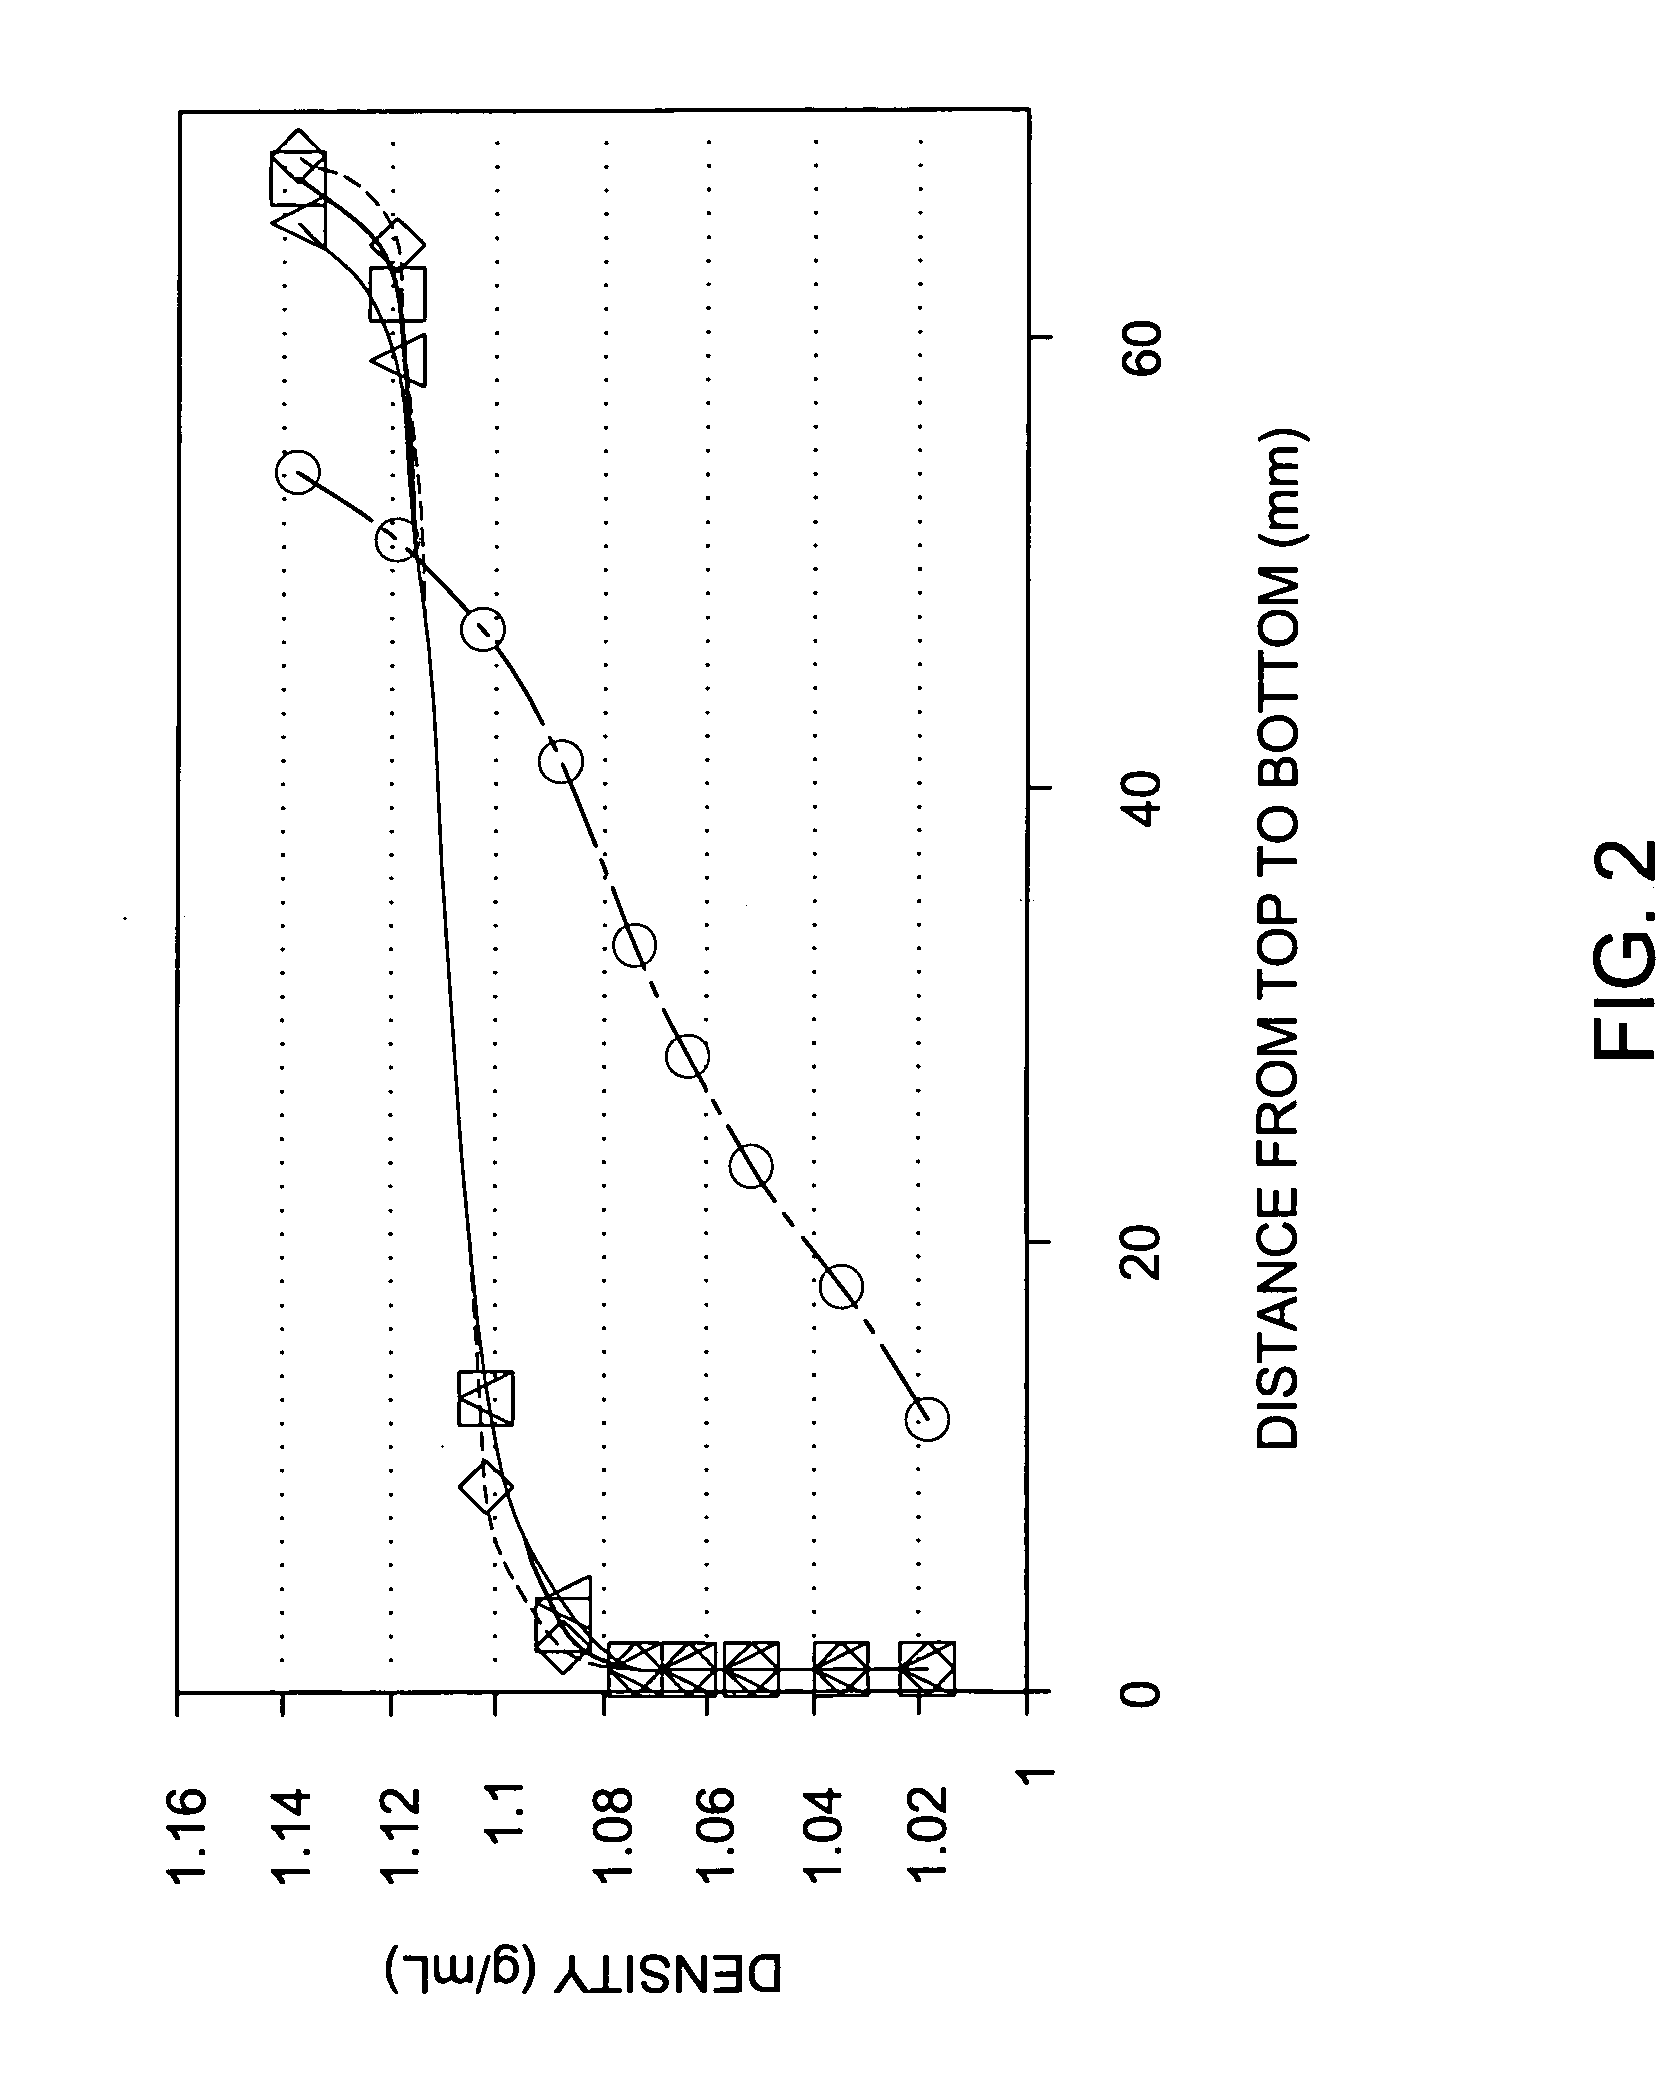 Hydrophilic functionalized colloidal silica compositions, methods of making, and uses therefor